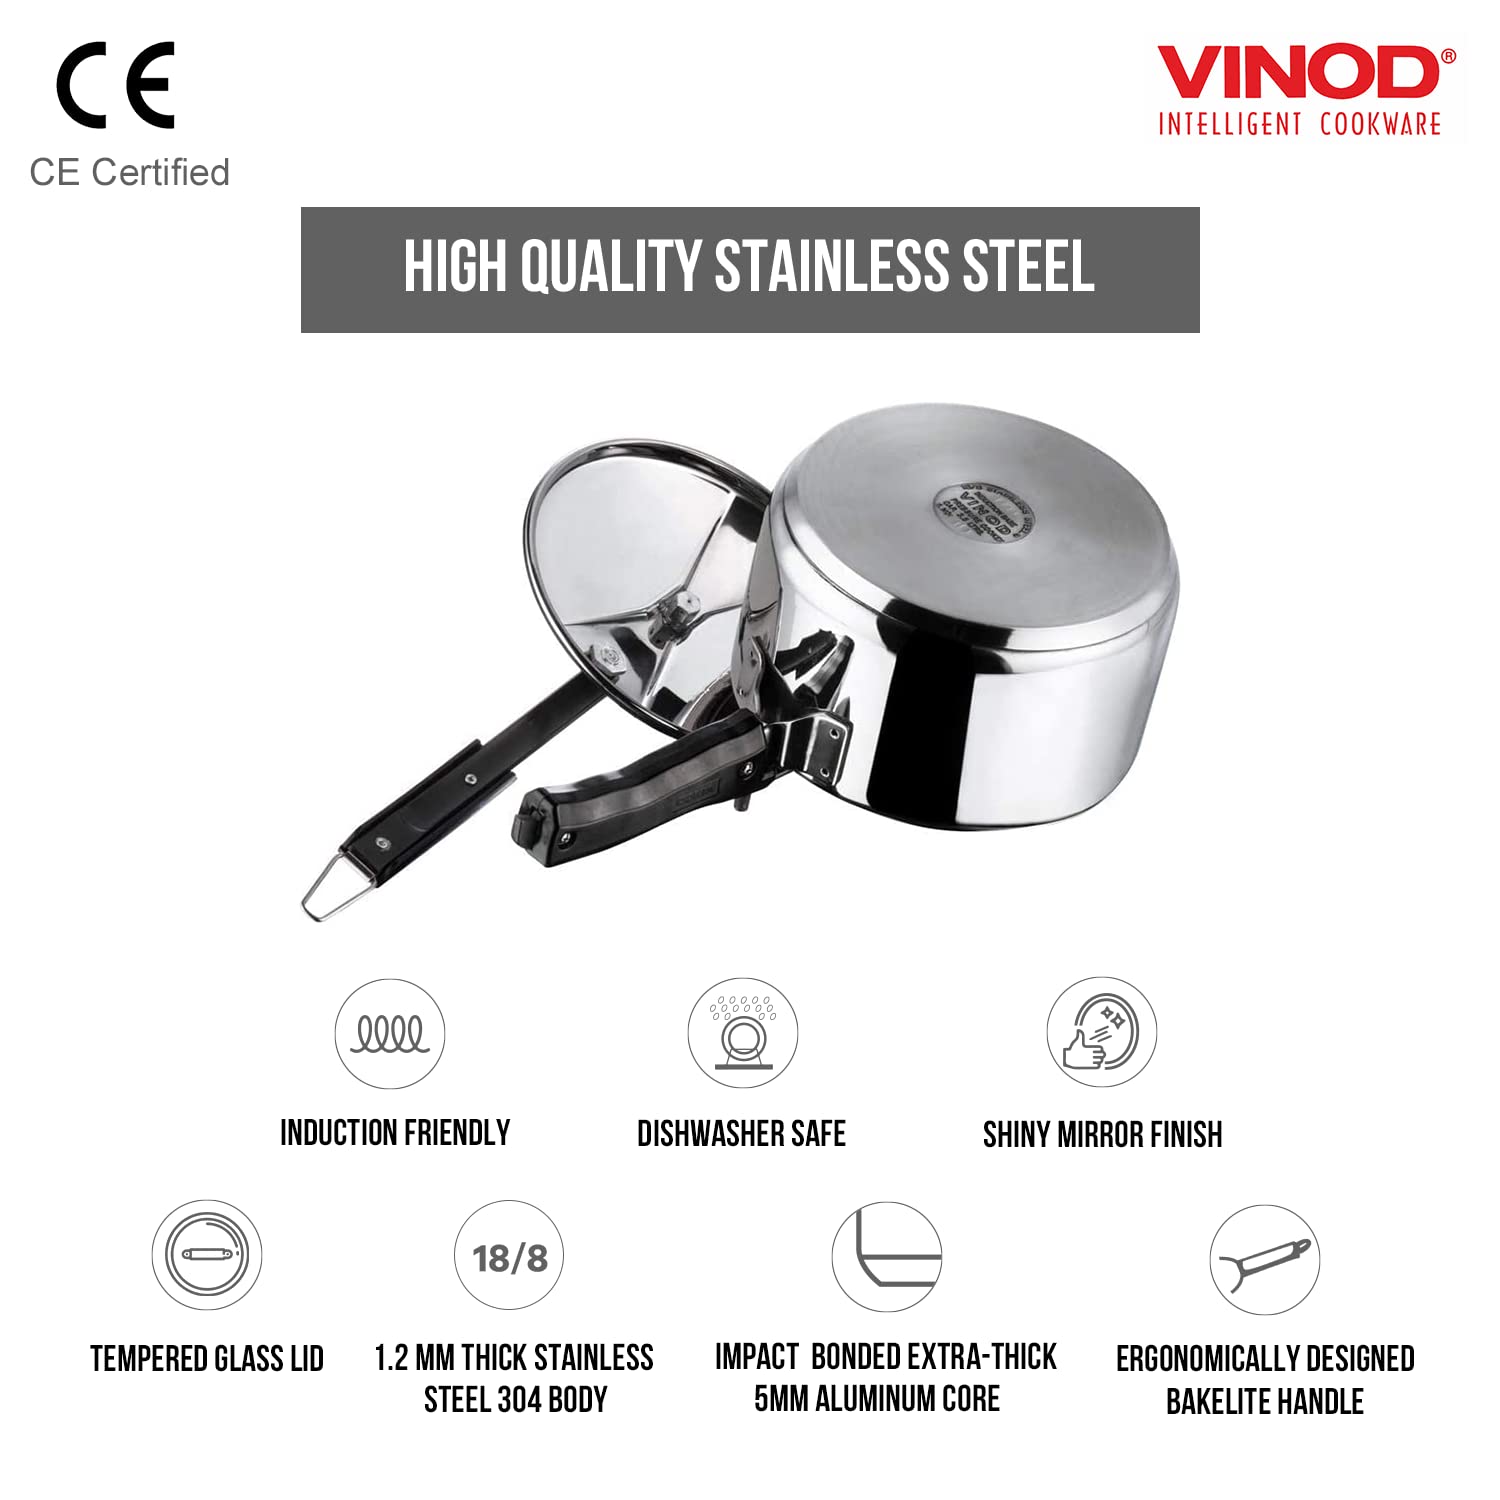 Vinod Pressure Cooker Stainless Steel – Inner Lid - 3.5 Liter – Sandwich Bottom – Indian Pressure Cooker – Induction Friendly Cooker – Best Used For Indian Cooking, Soups, and Rice Recipes, Quinoa